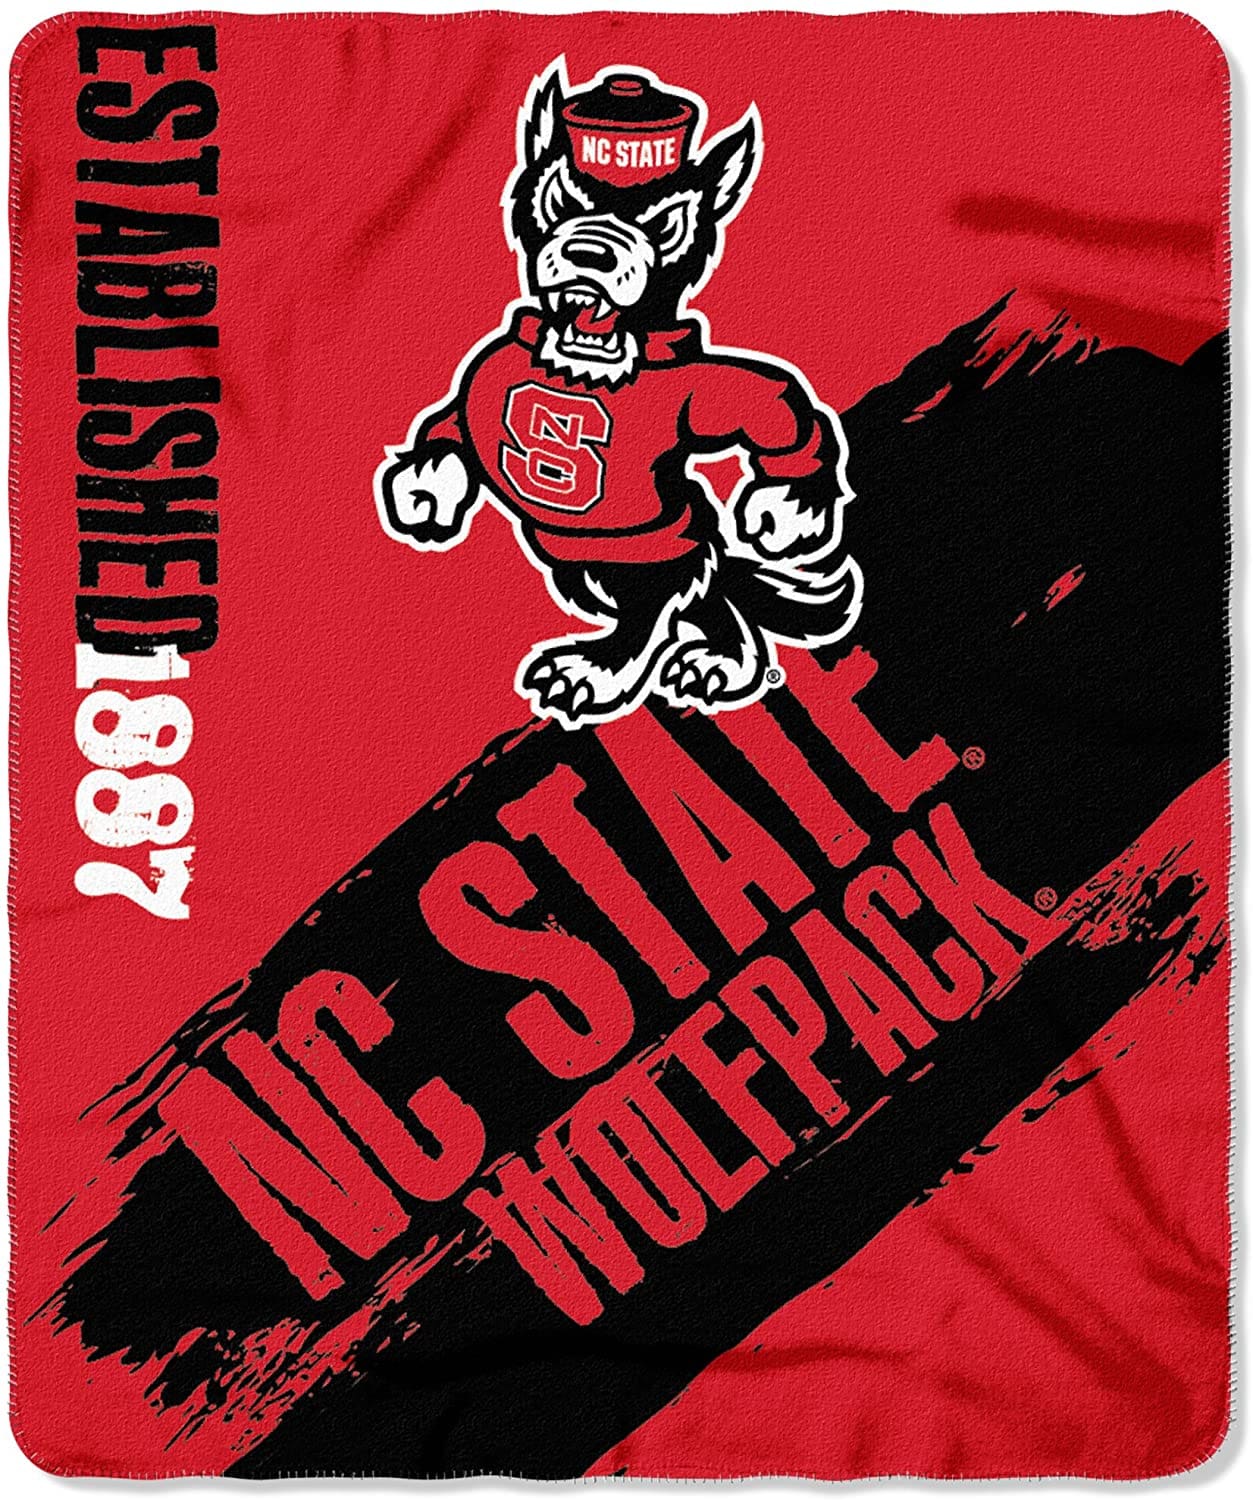 Officially Licensed Ncaa Printed Throw North Carolina State Wolfpack Fleece Blanket